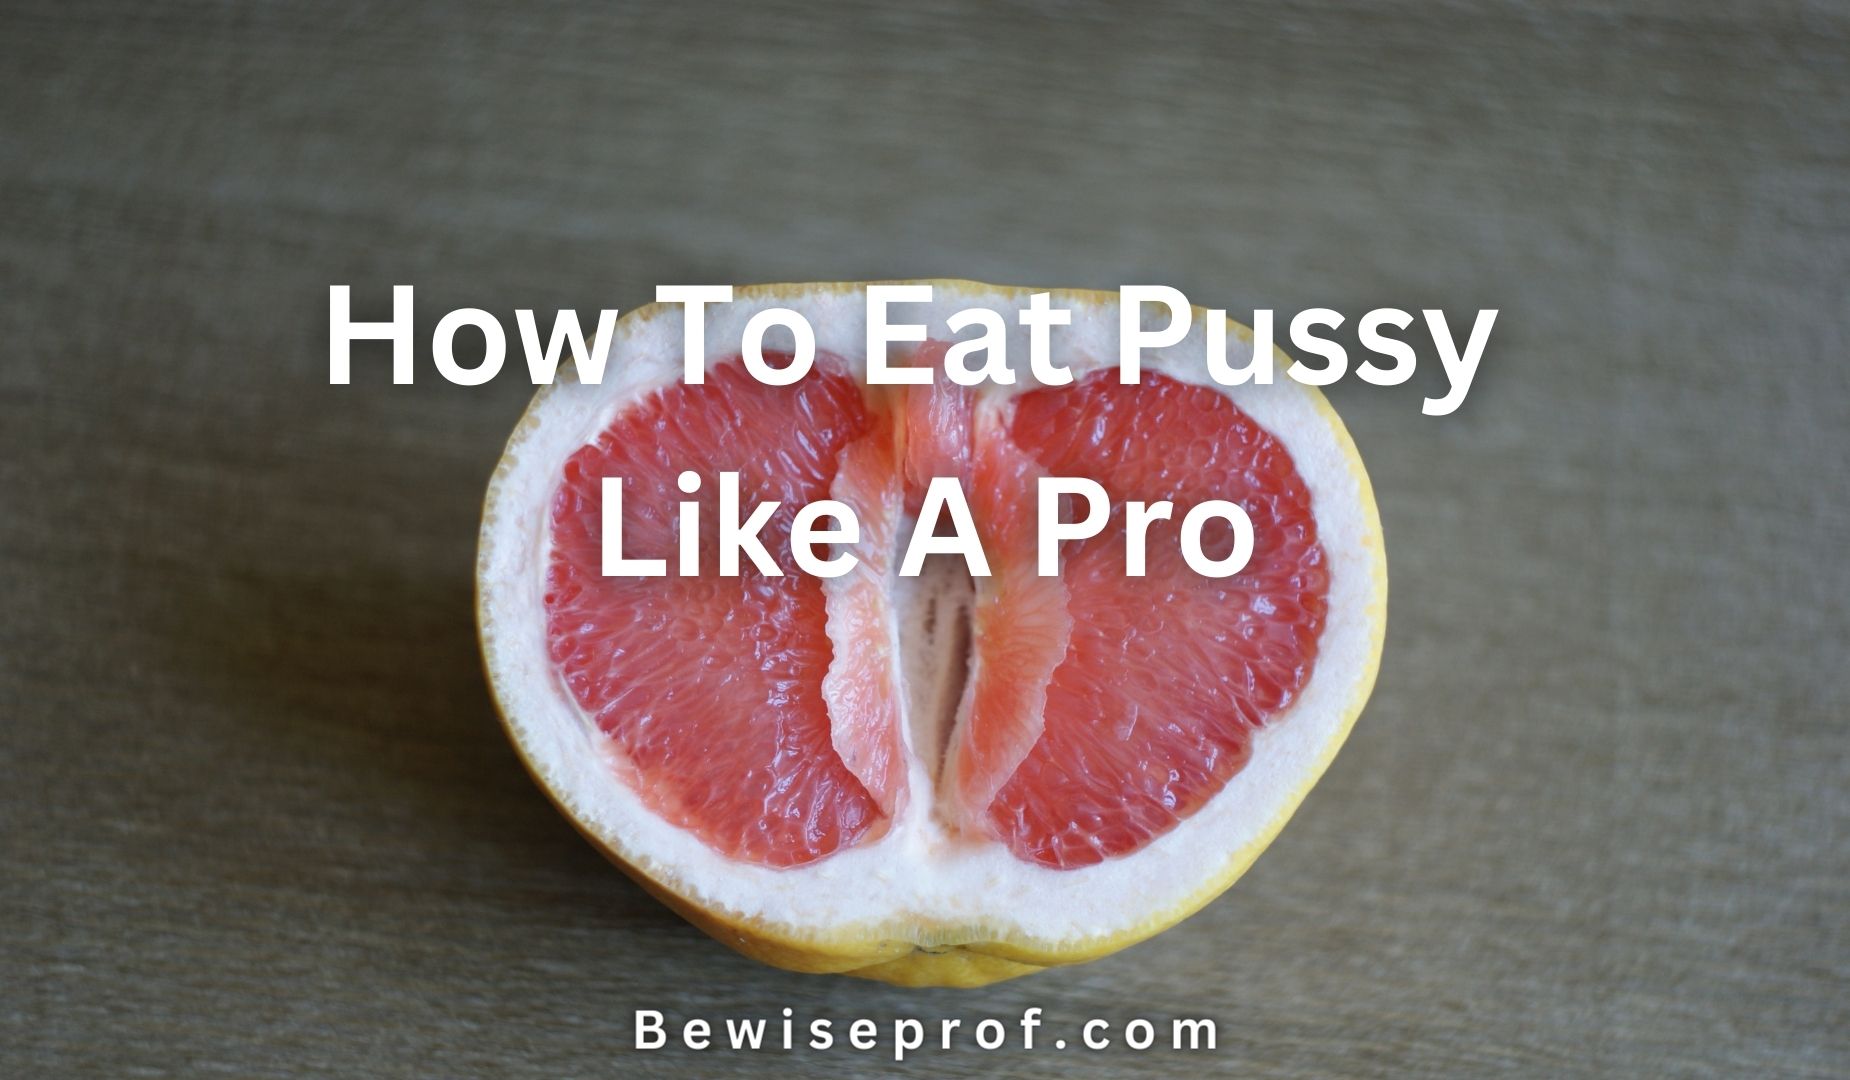 How To Eat Pussy Like A Pro